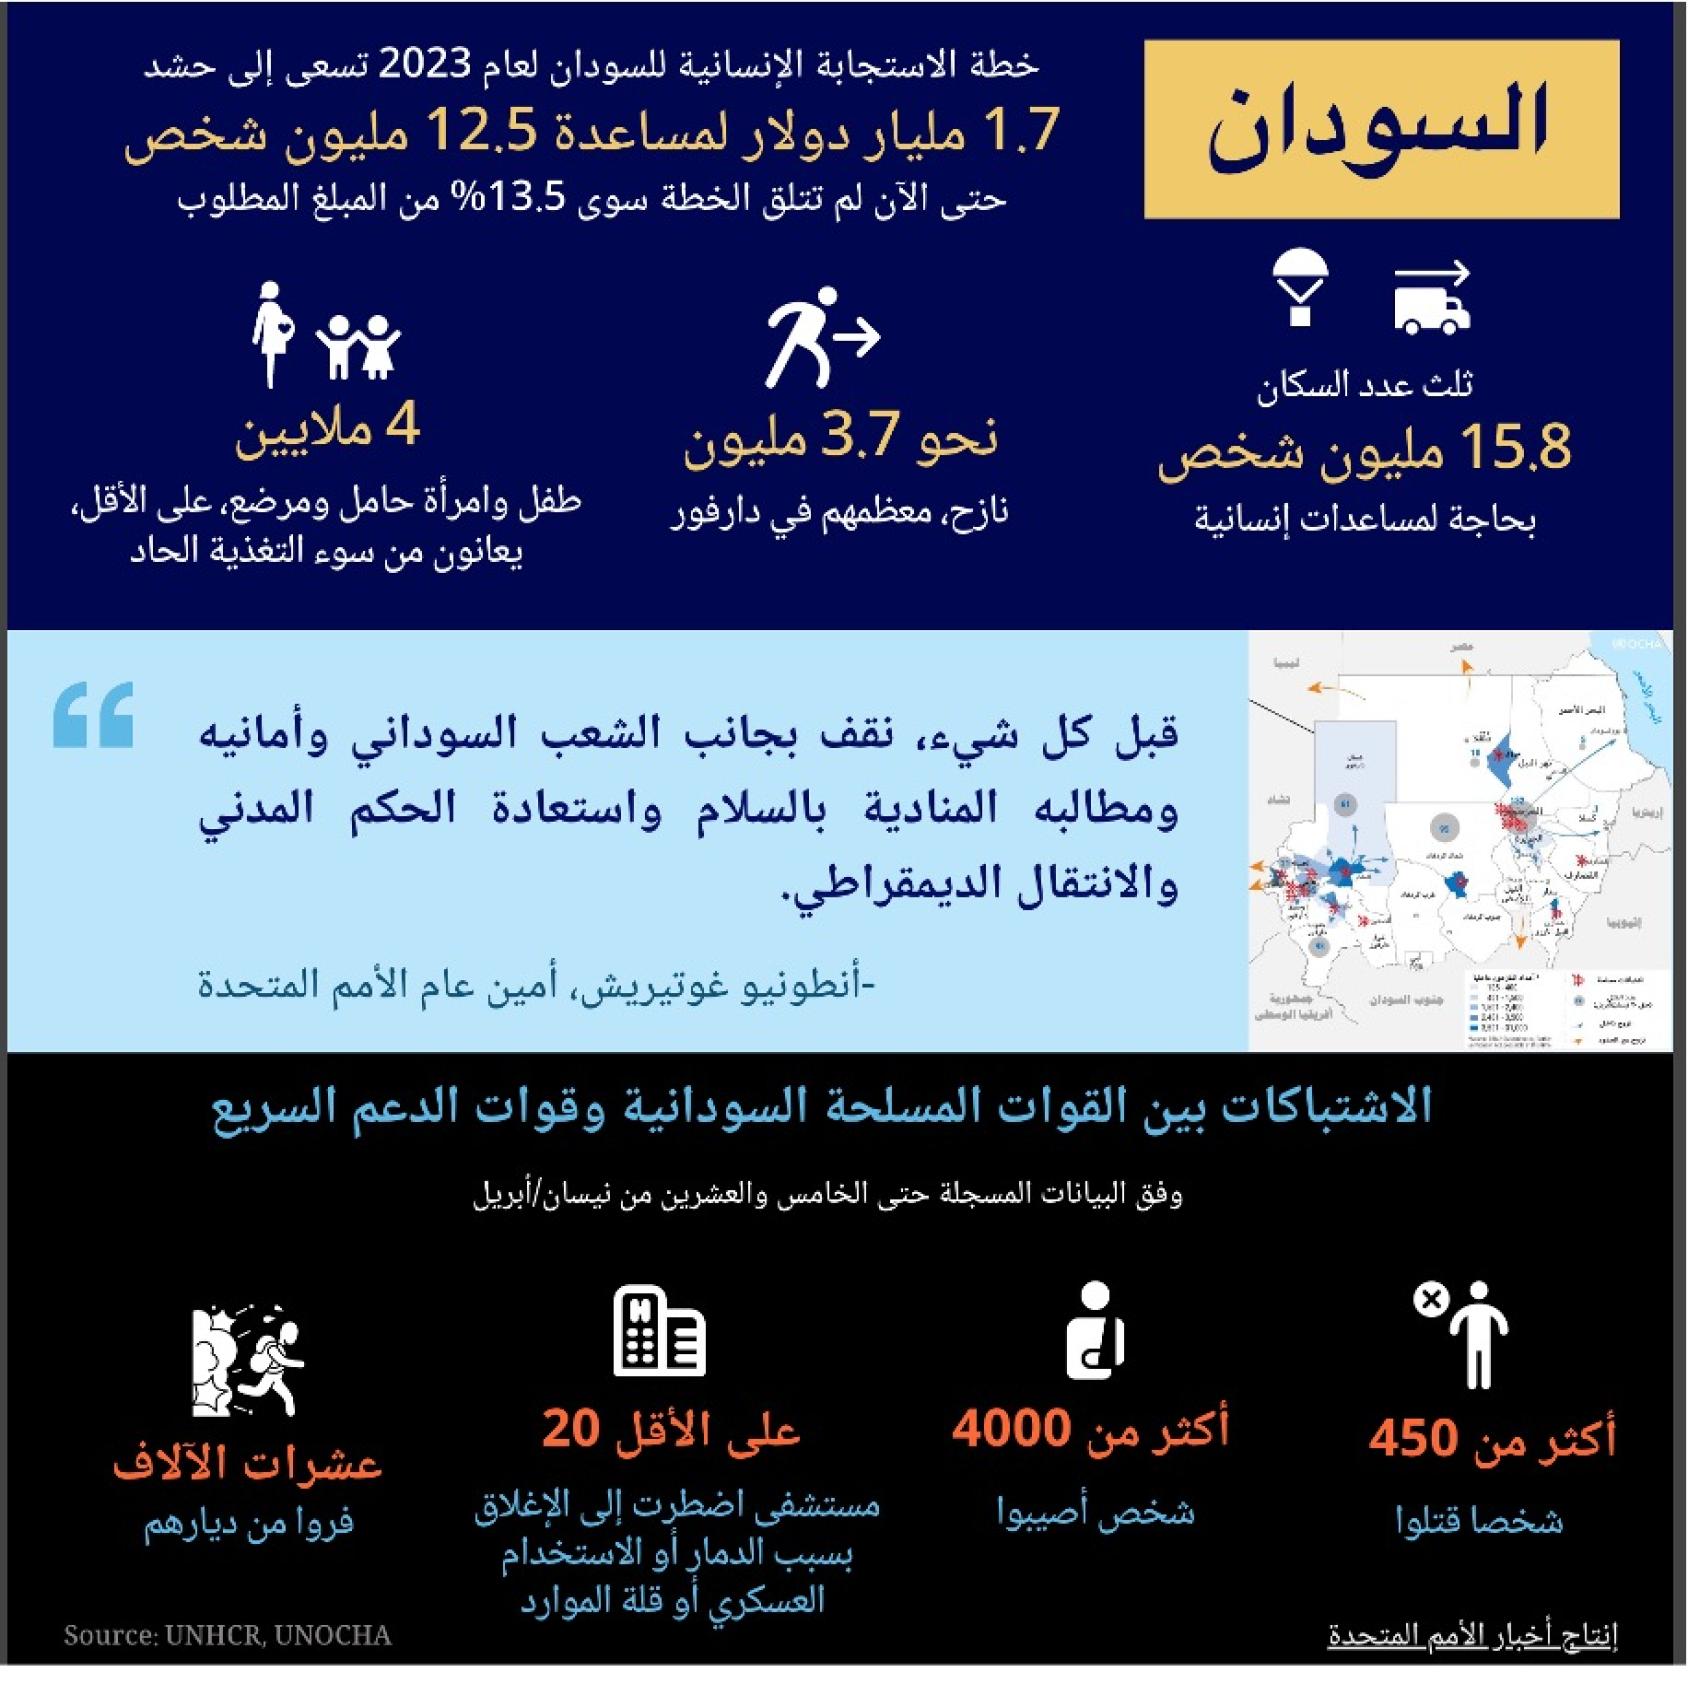 icons, numbers and text capturing a summary of the crisis situation in Sudan